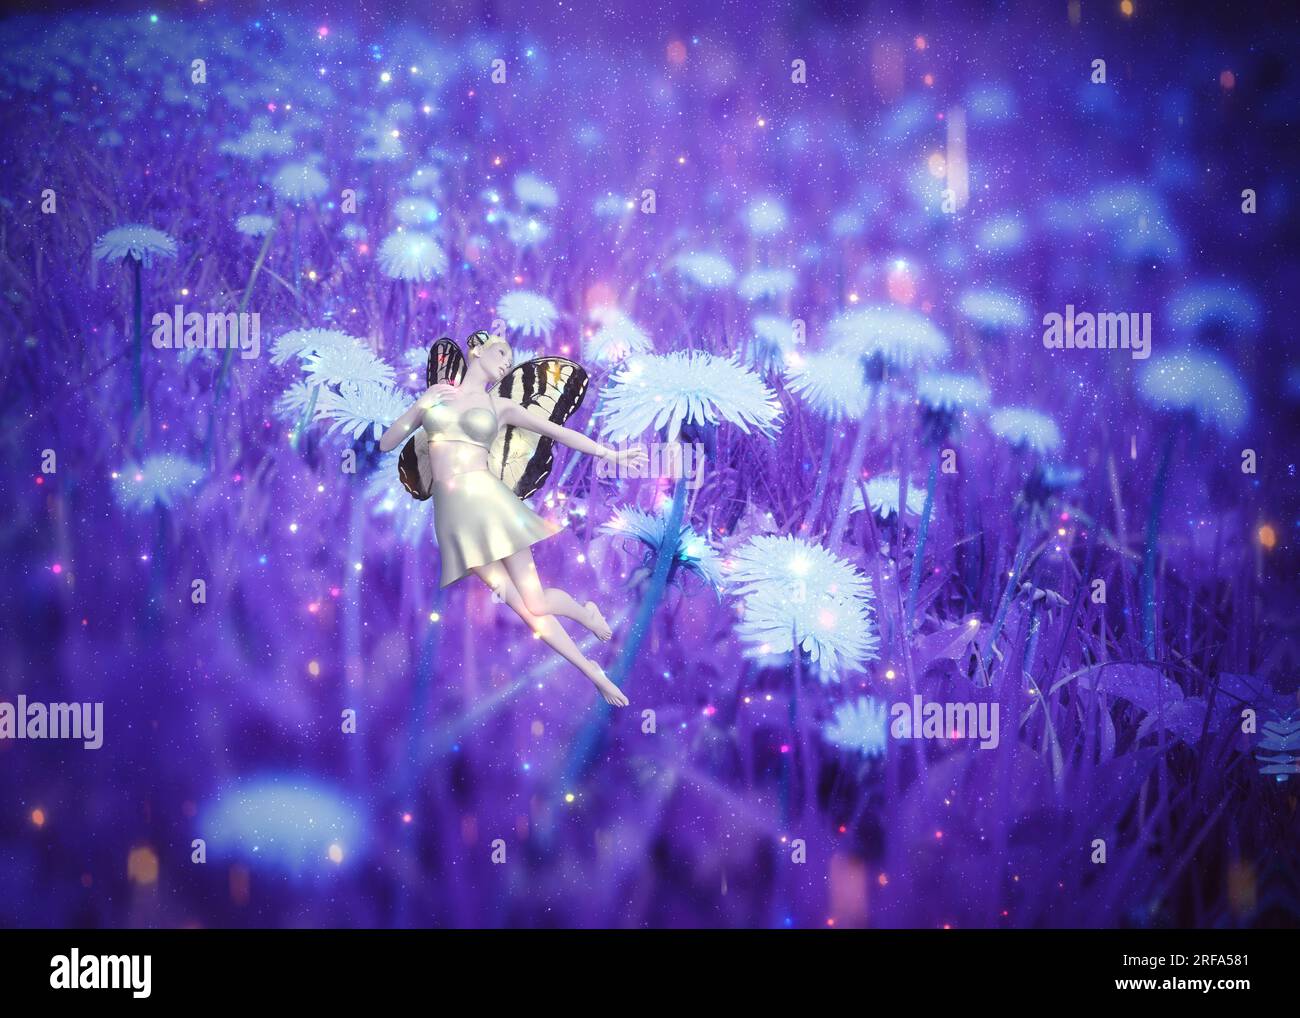 Abstract dandelion flowers in purple grass and 3D fairy girl, photo manipulation, illustration. Stock Photo